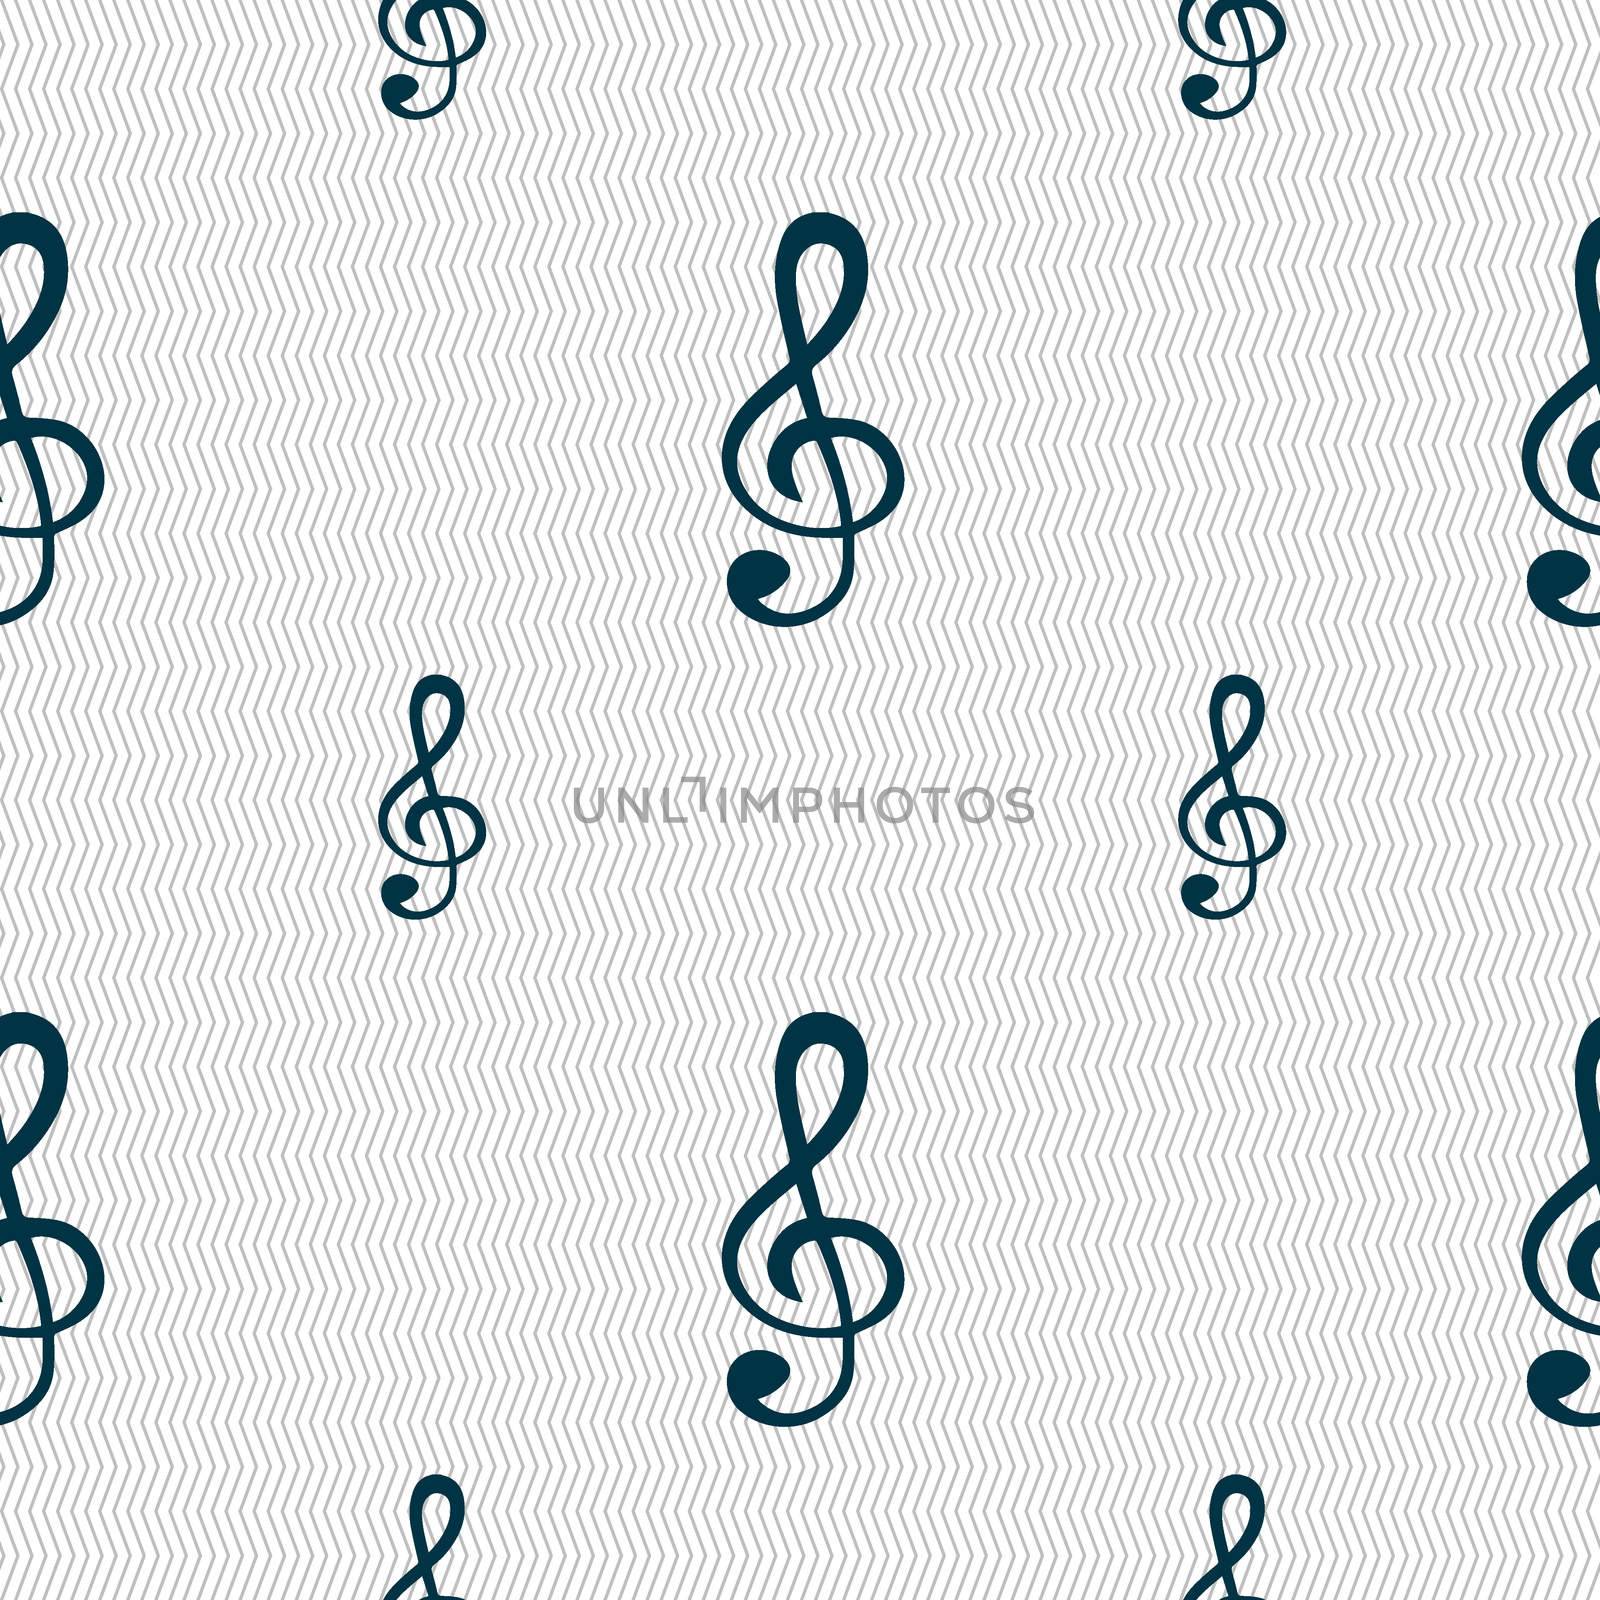 treble clef icon. Seamless pattern with geometric texture. illustration